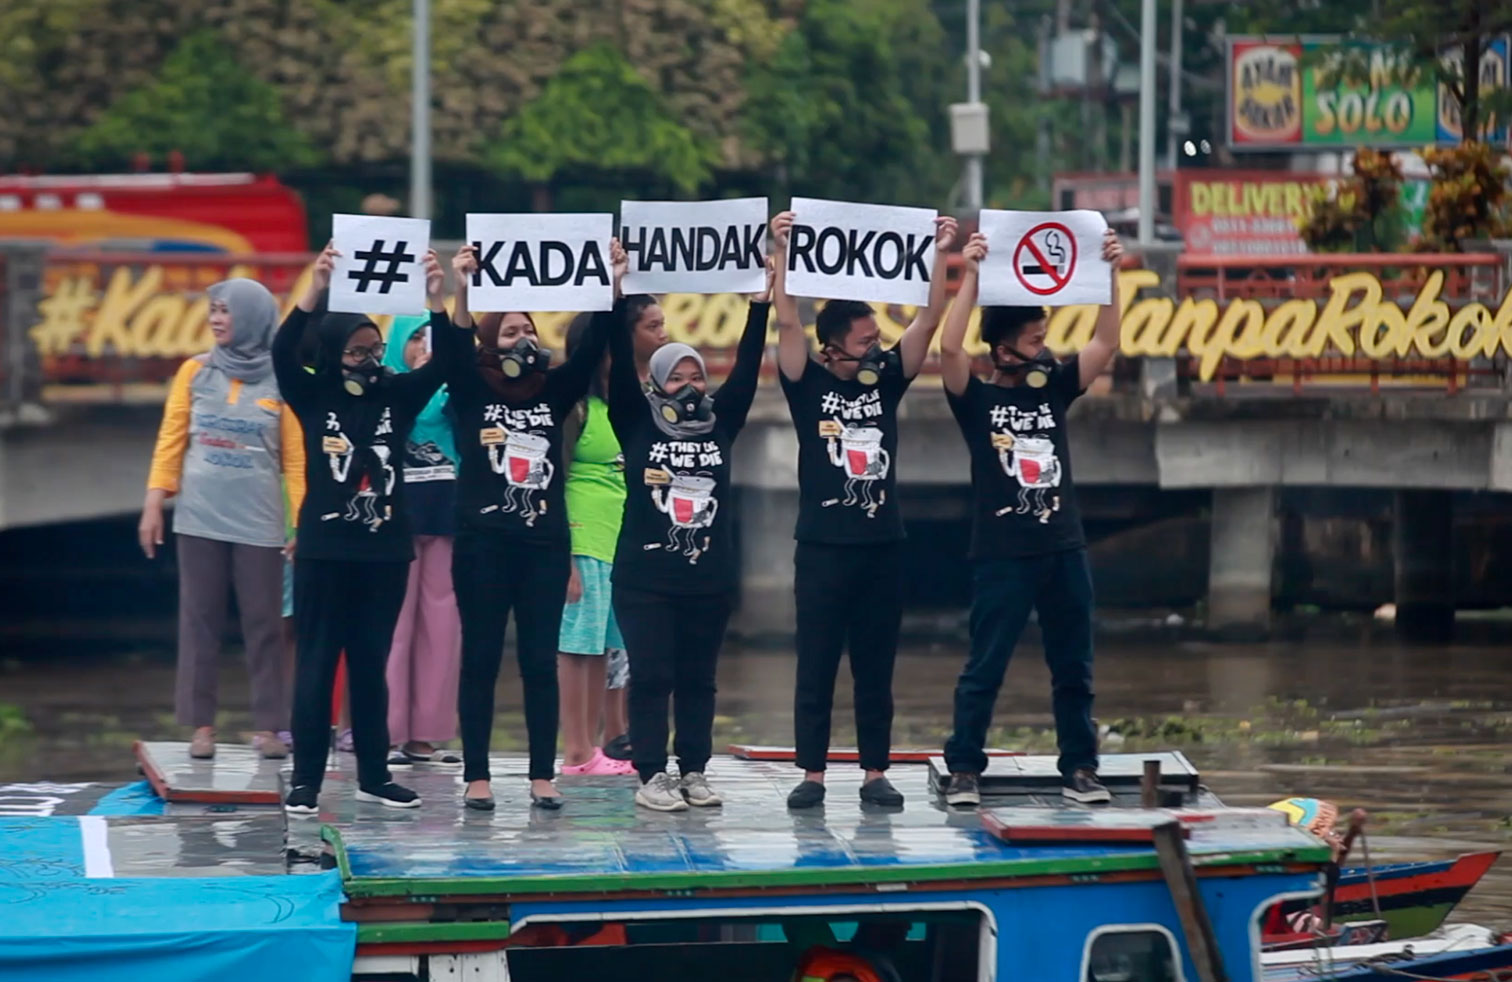 Youth showcased the call to “Say No to Smoking (or in local language ‘Kada Handak Rokok’) in Banjarmasin, Indonesia to campaign for better smoke free enforcement (January 2018).